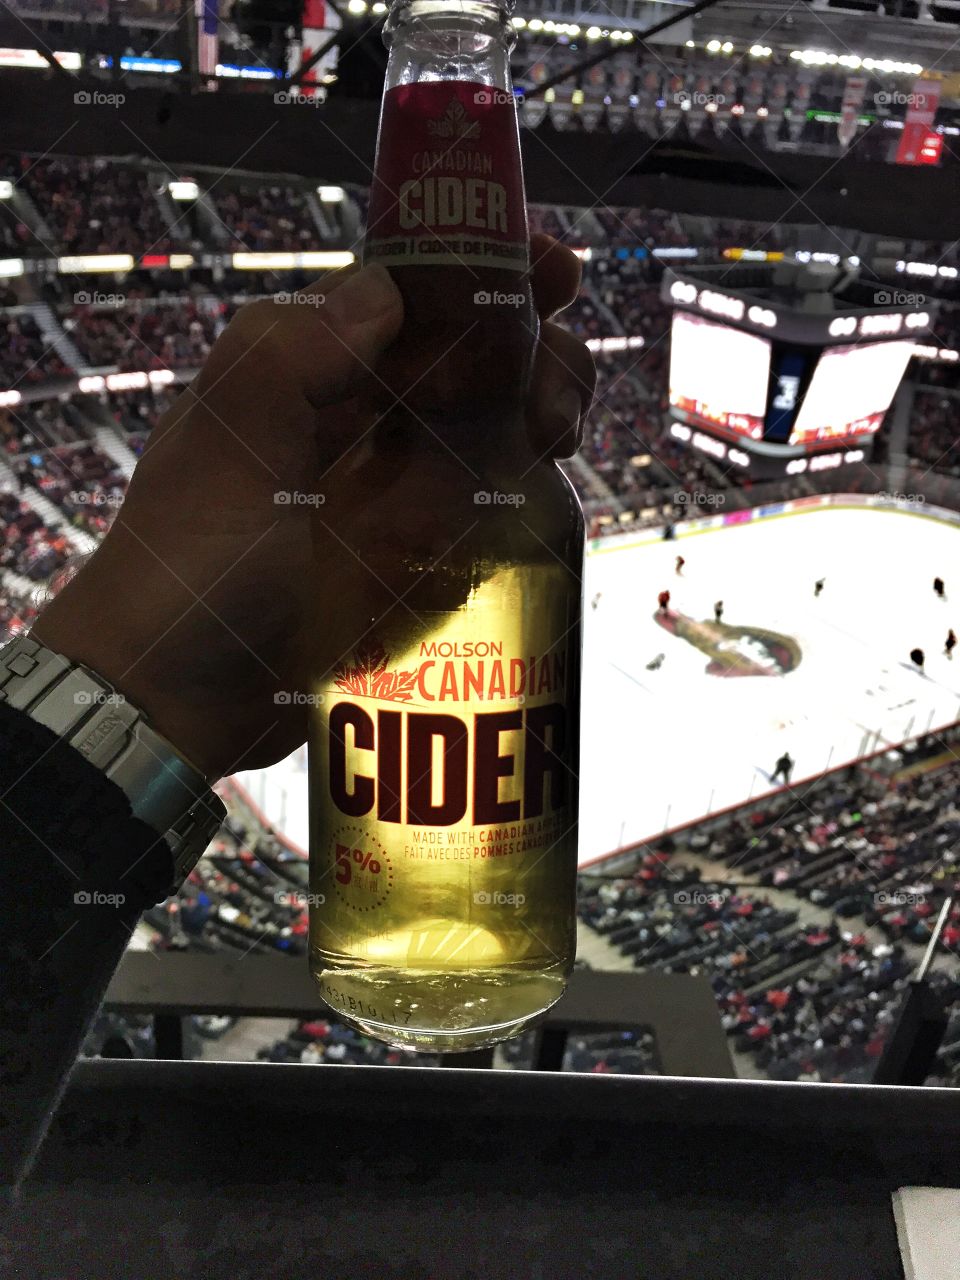 Hockey in Ottawa with a Molson Canadian in my hand

Truly a Canadian moment in the VIP Box